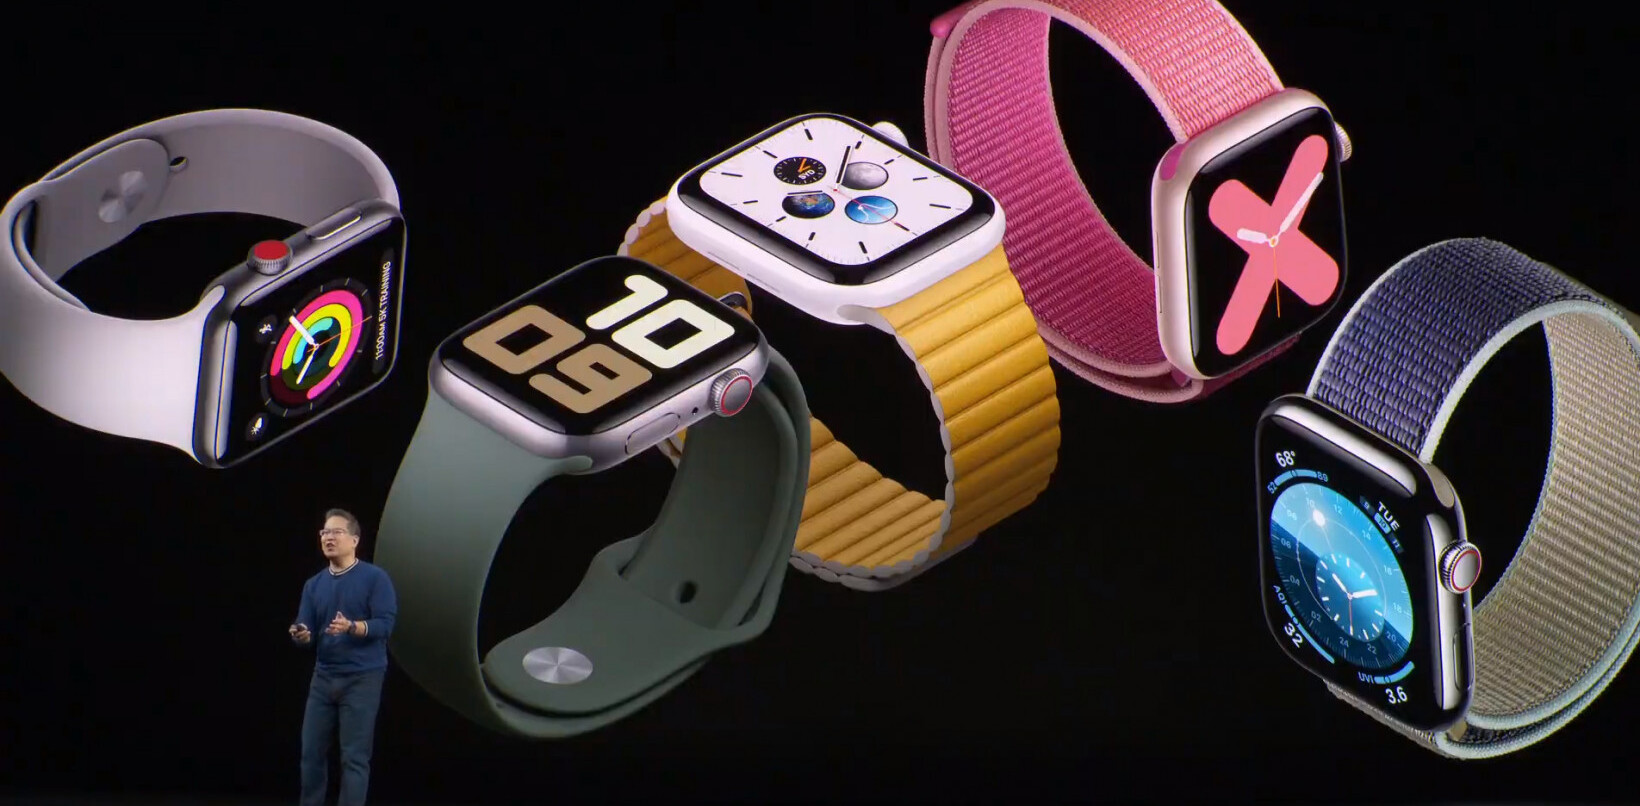 Apple Watch Series 5 gets an always-on display and $399 starting price